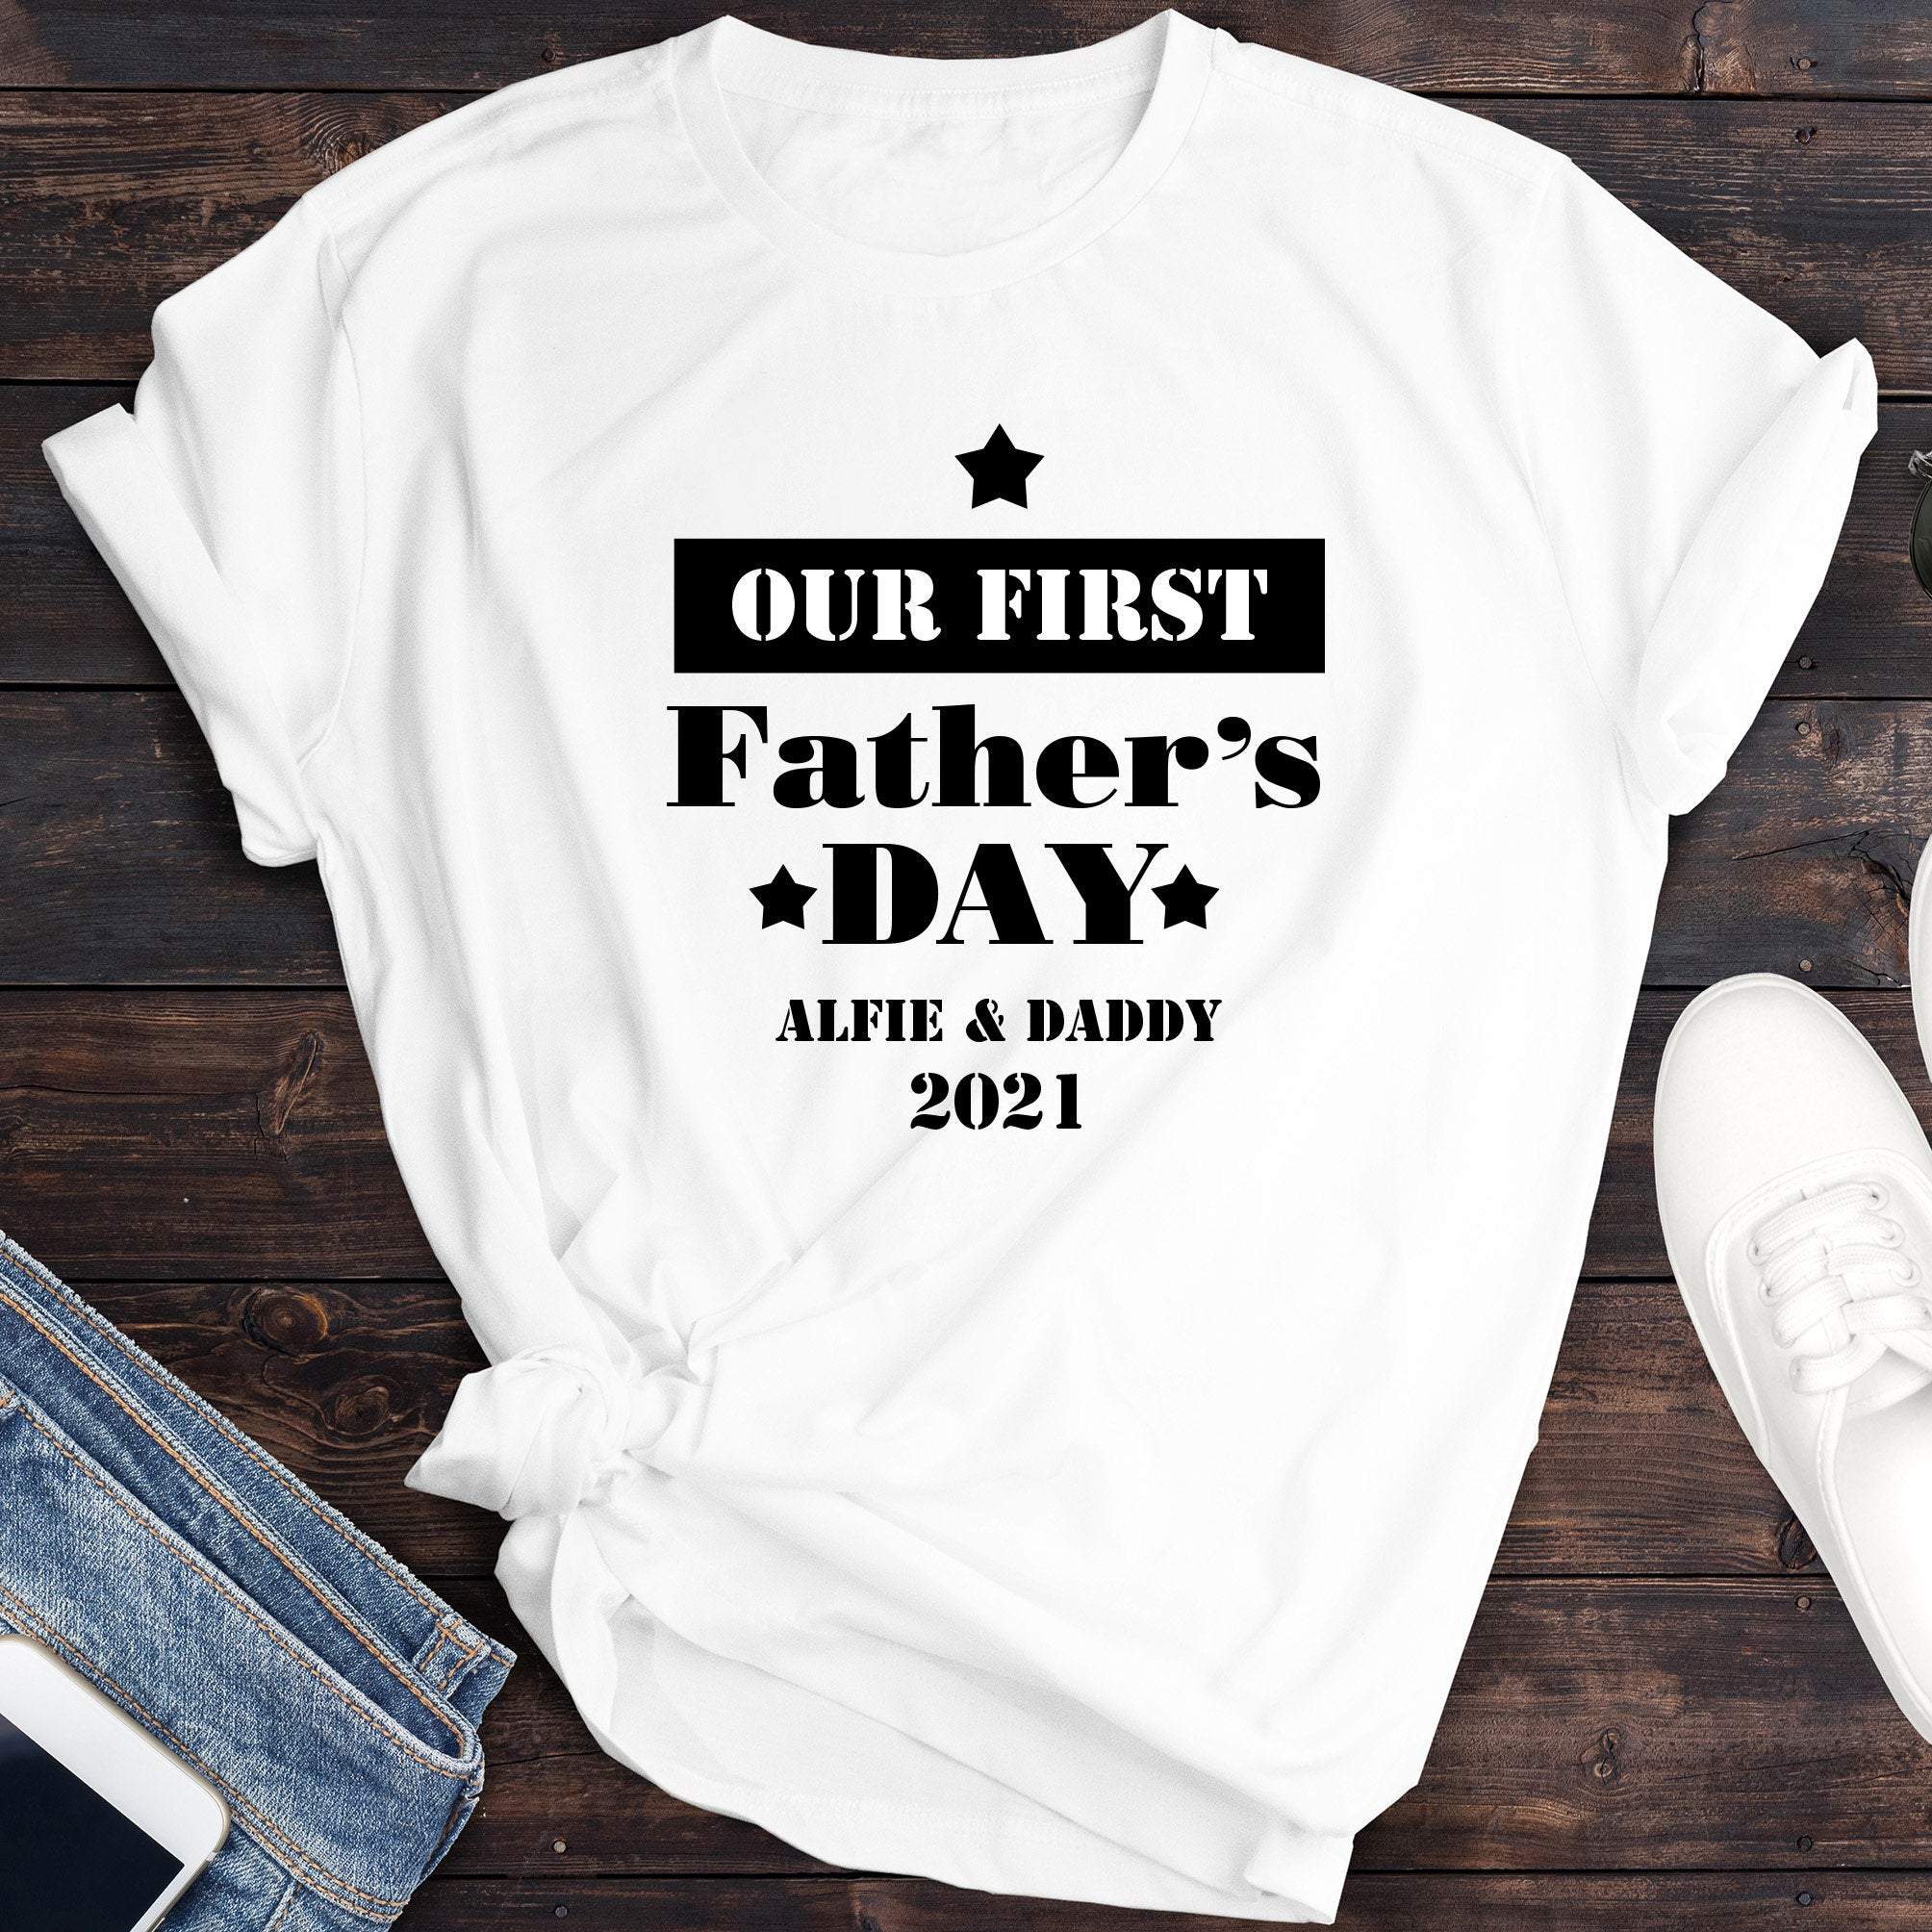 Personalised matching Father's Day t-shirt with names, QTY 1, Our first Father's Day Gift